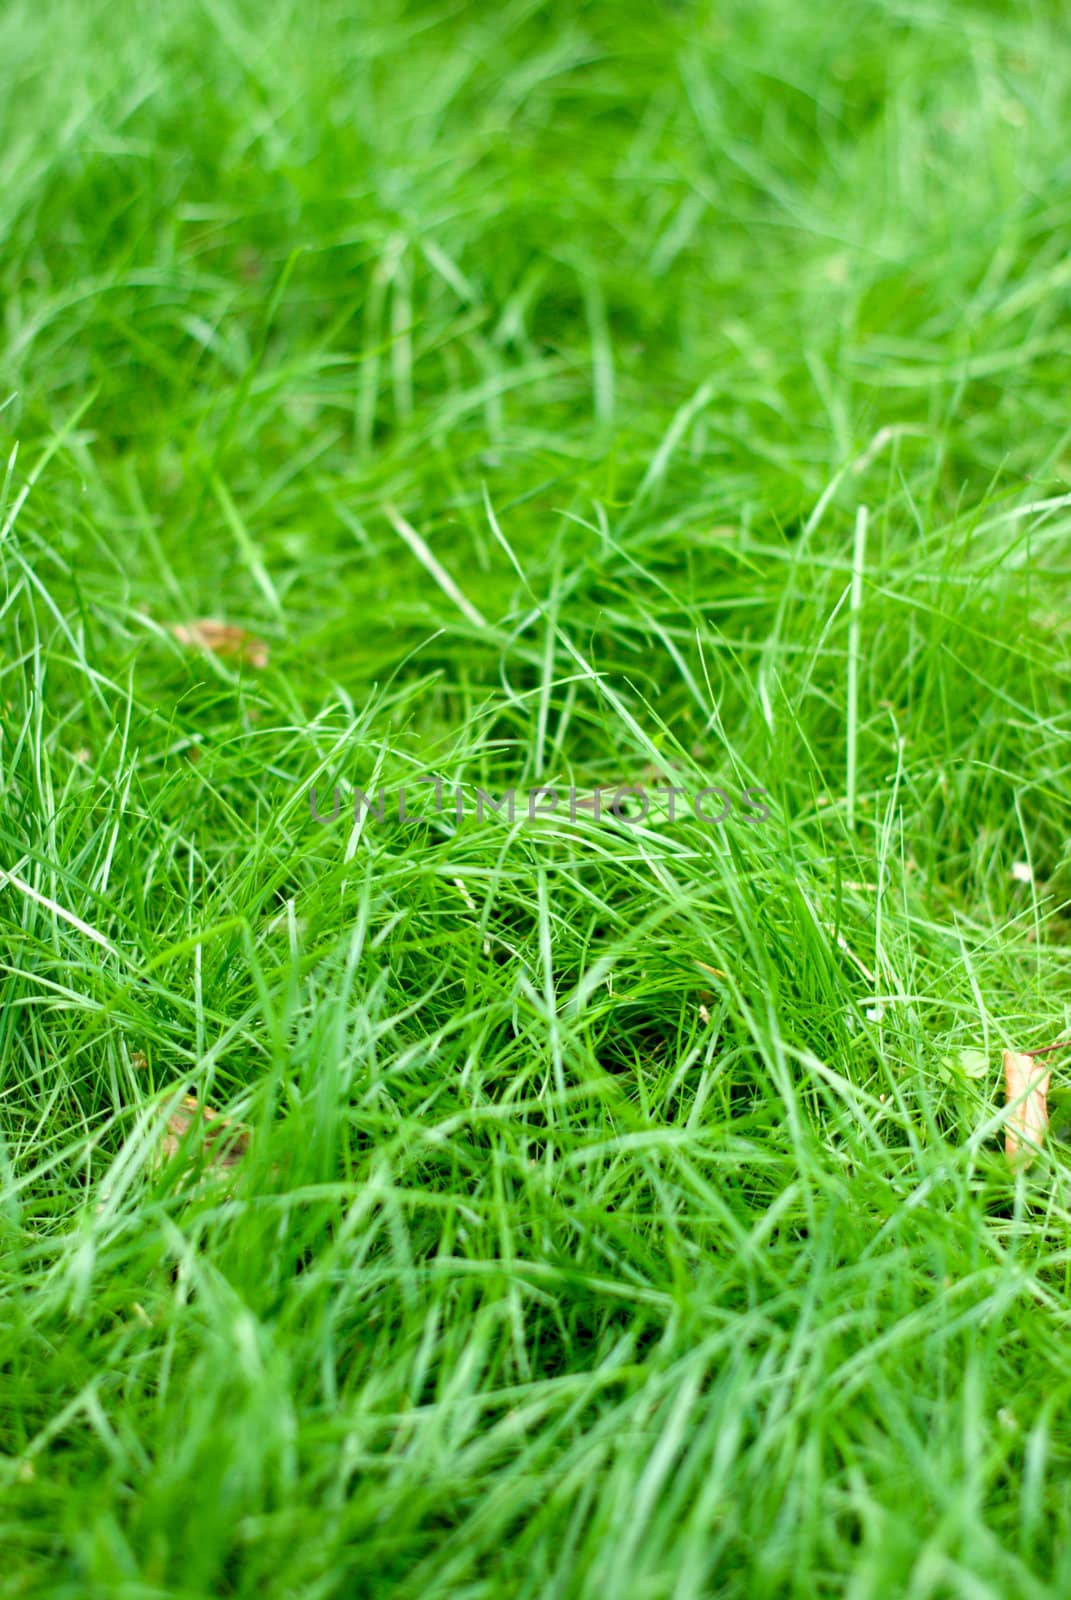 Grass background with the leaves